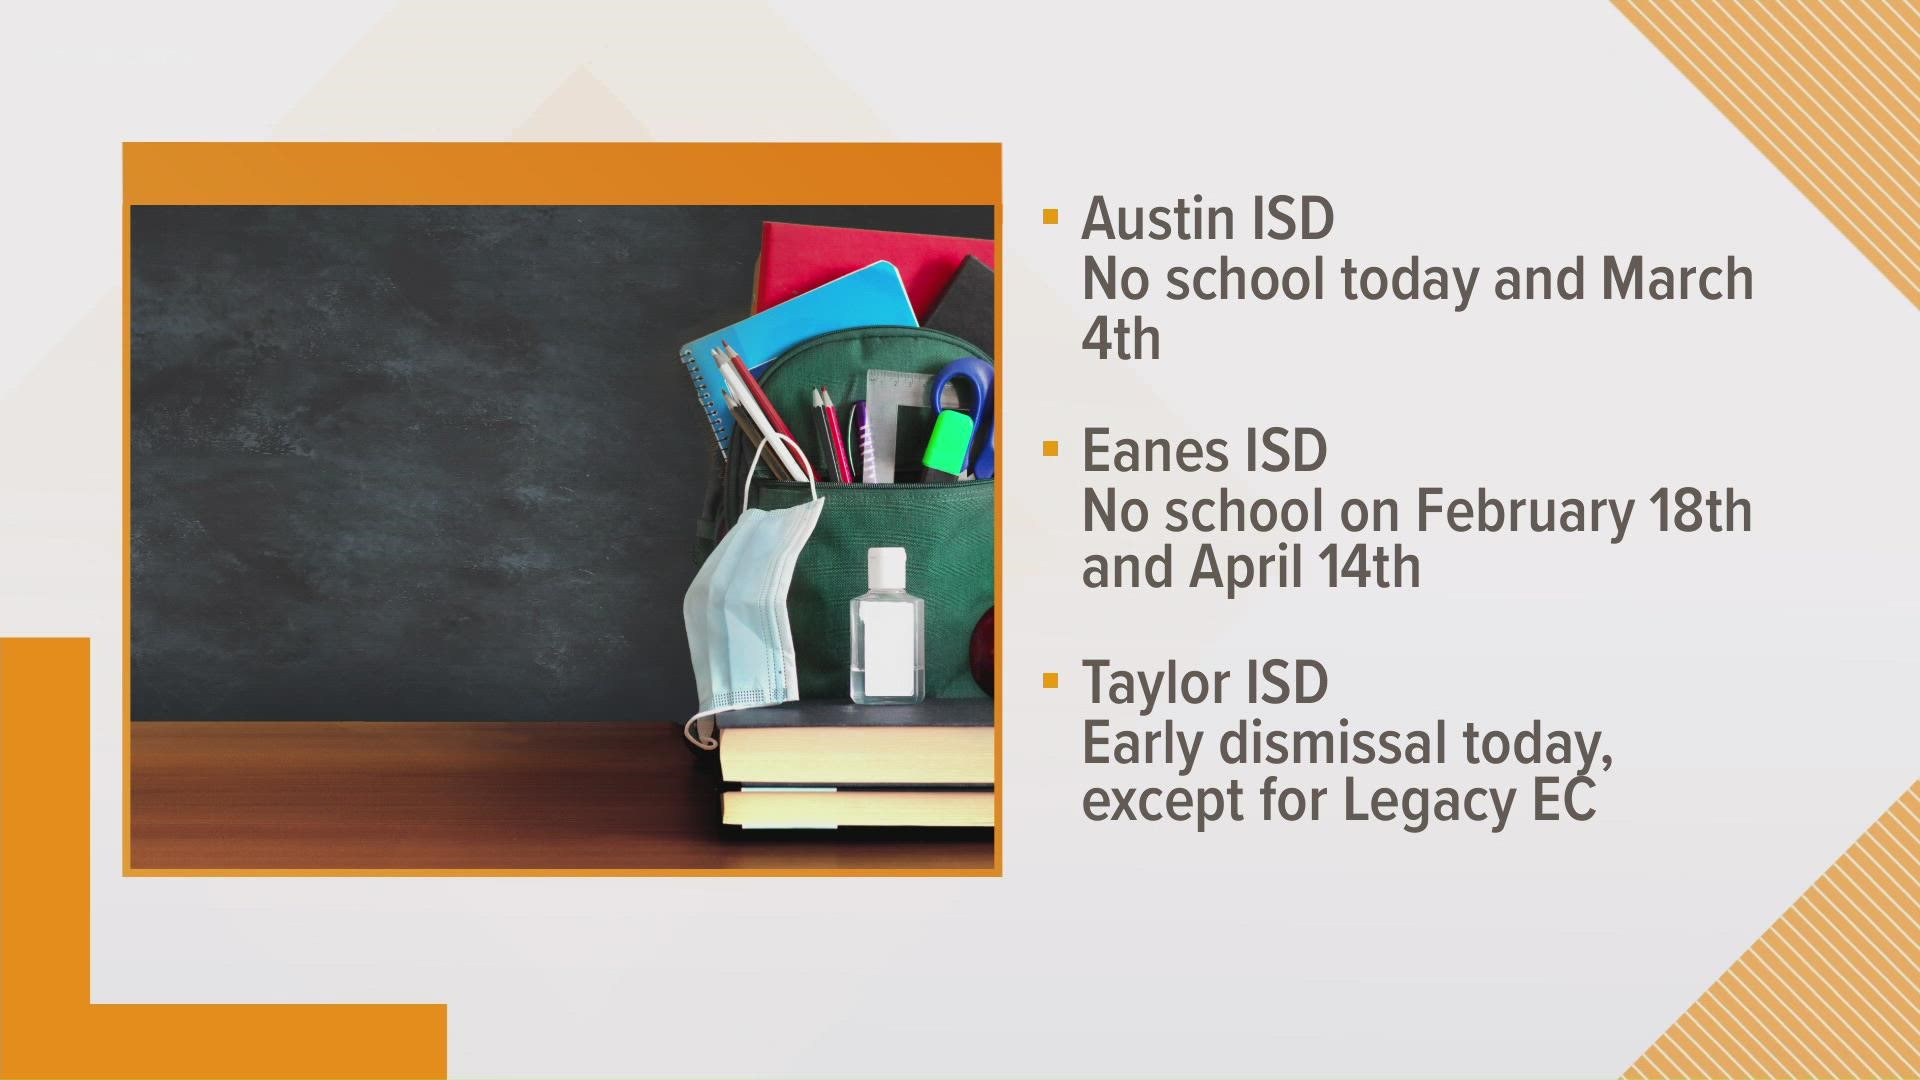 Austin ISD will have a three-day weekend starting Friday.